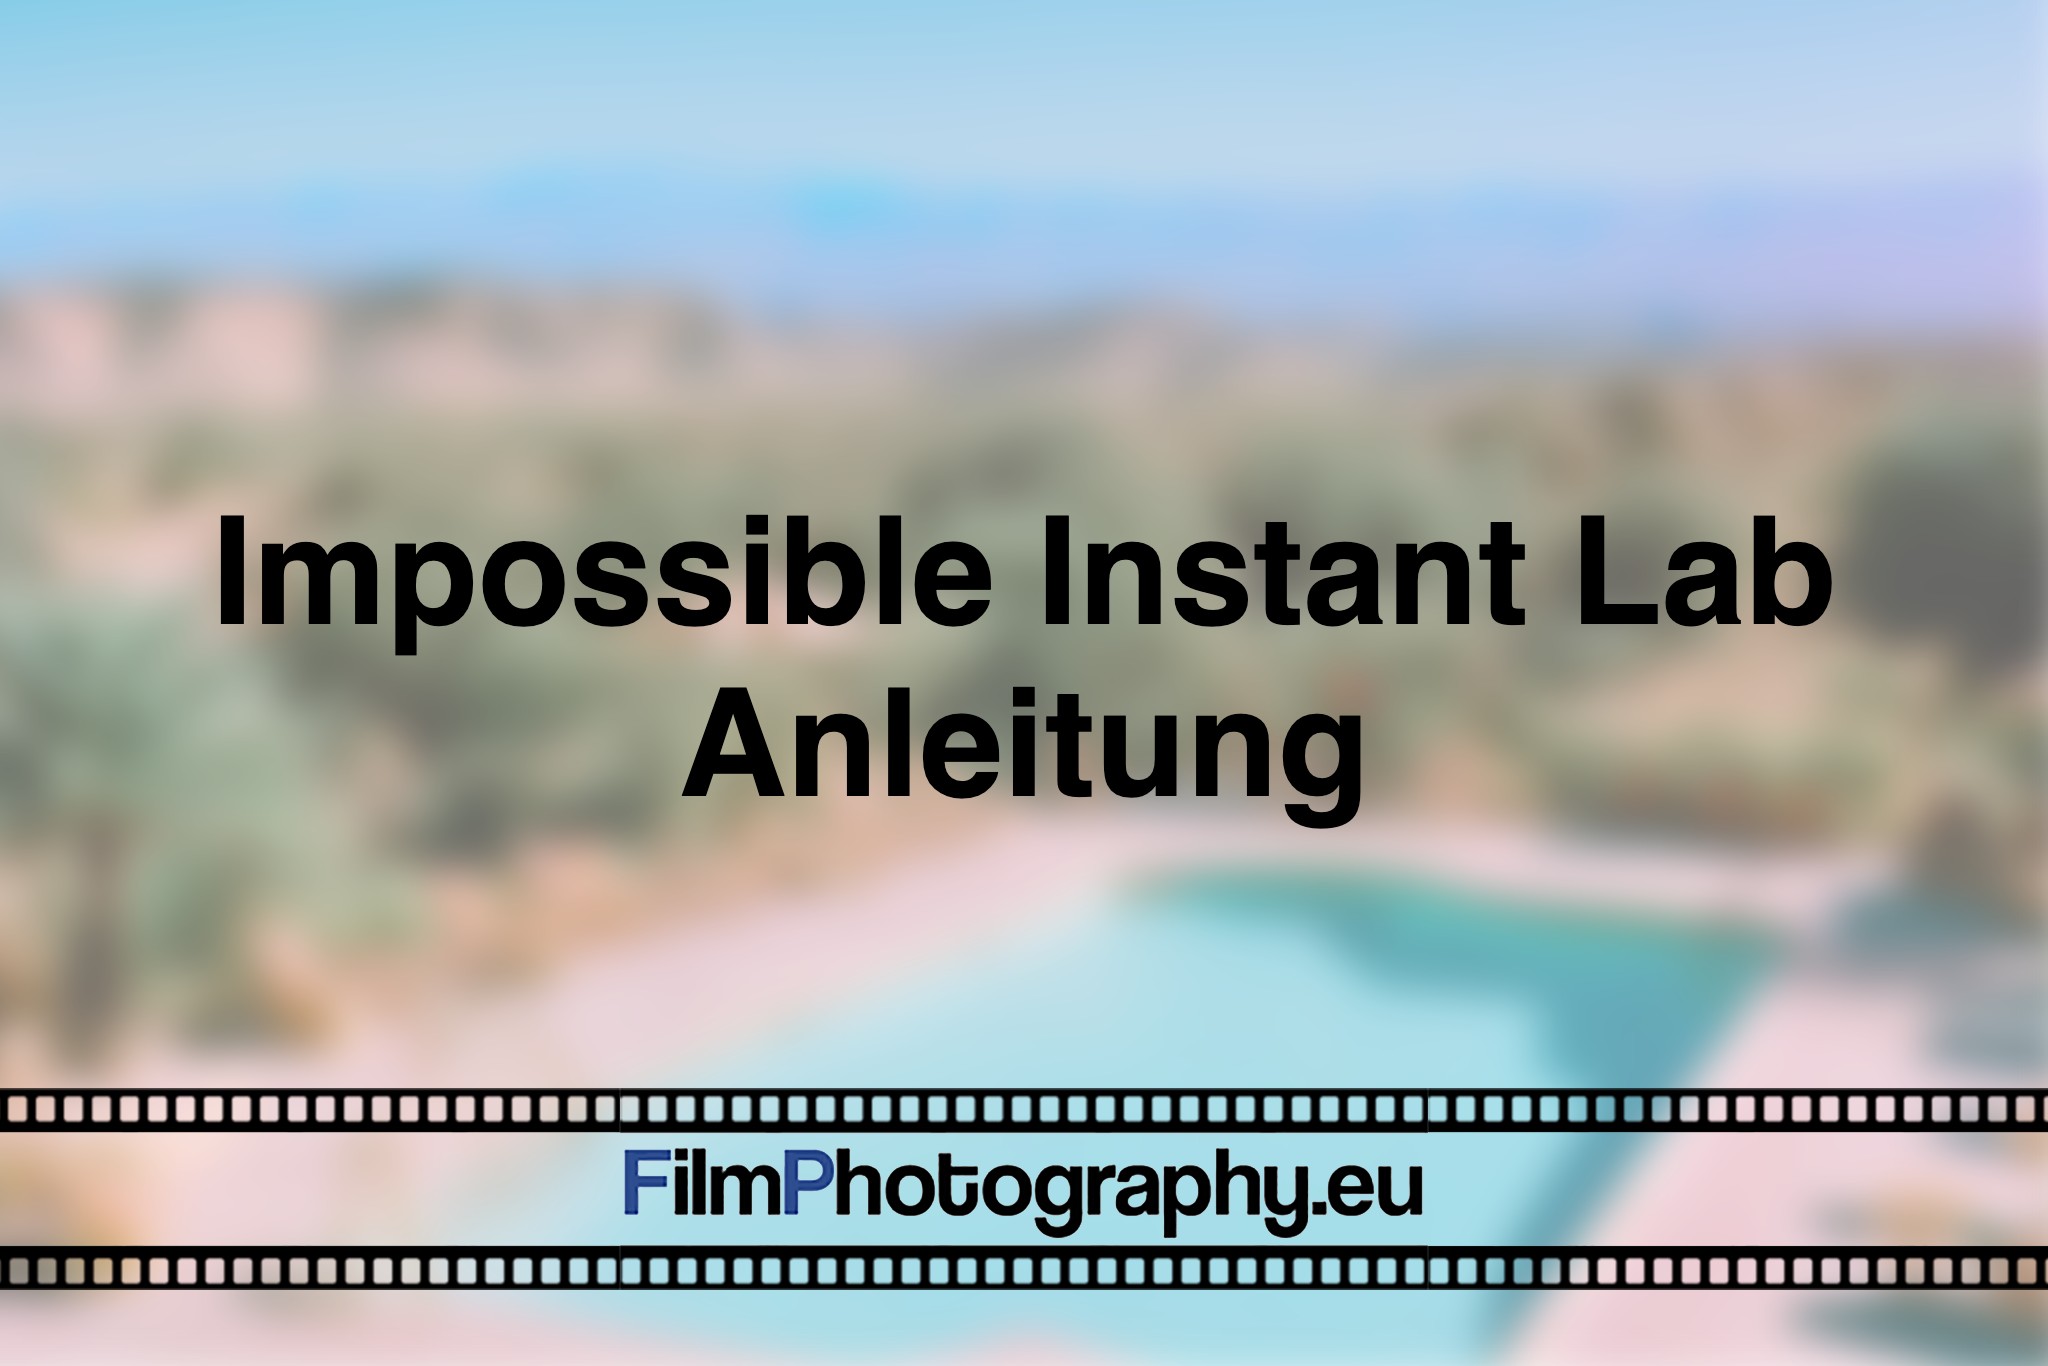 impossible-instant-lab-anleitung-photo-bnv